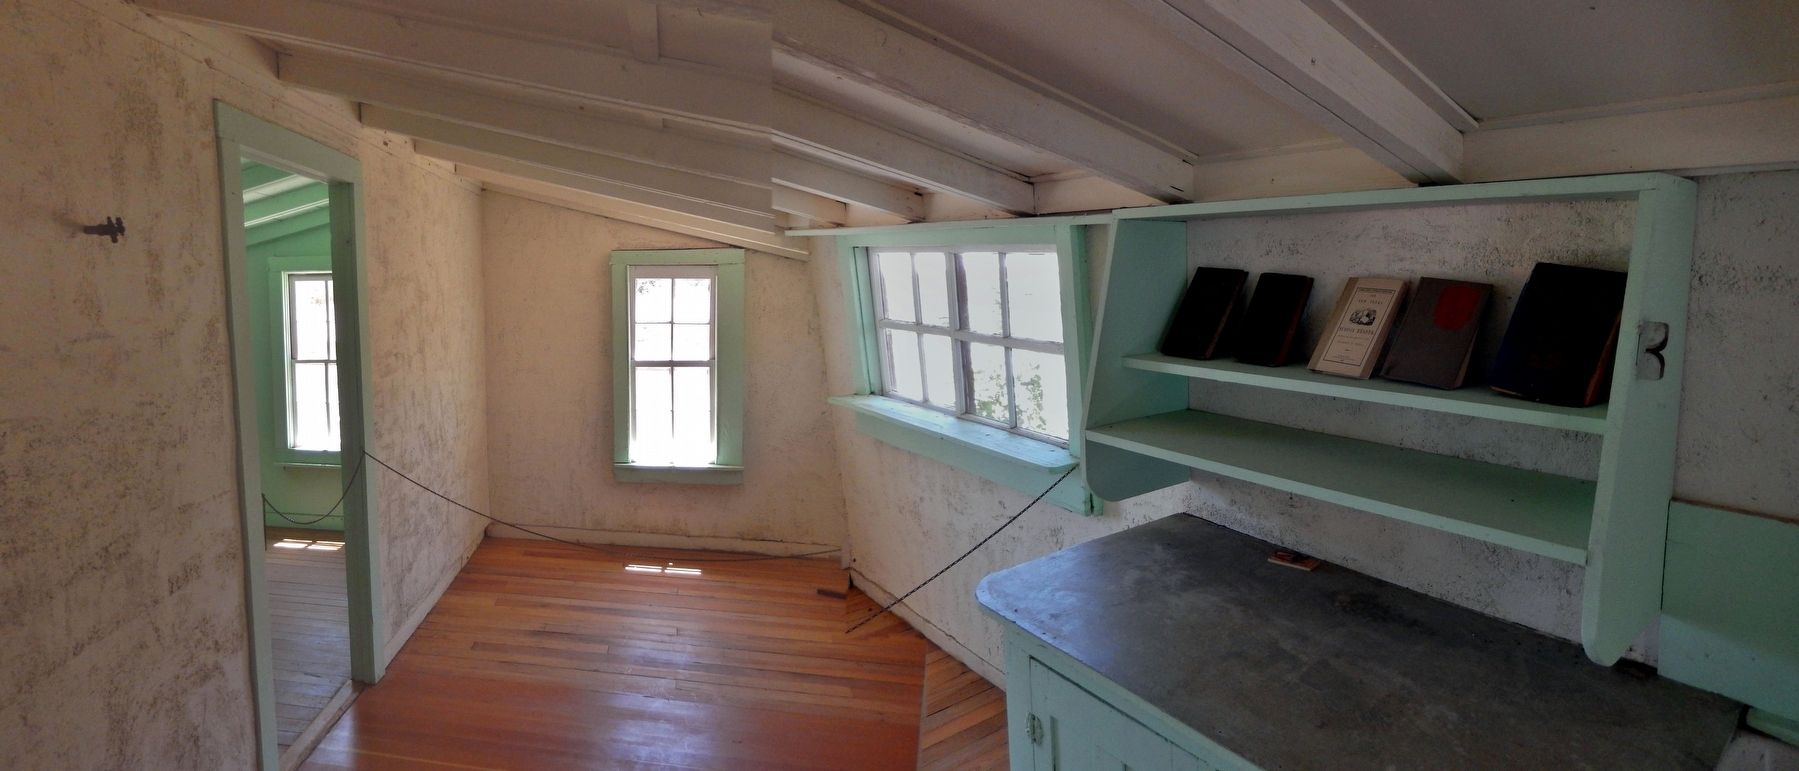 Frijole School House (<i>interior view</i>) image. Click for full size.